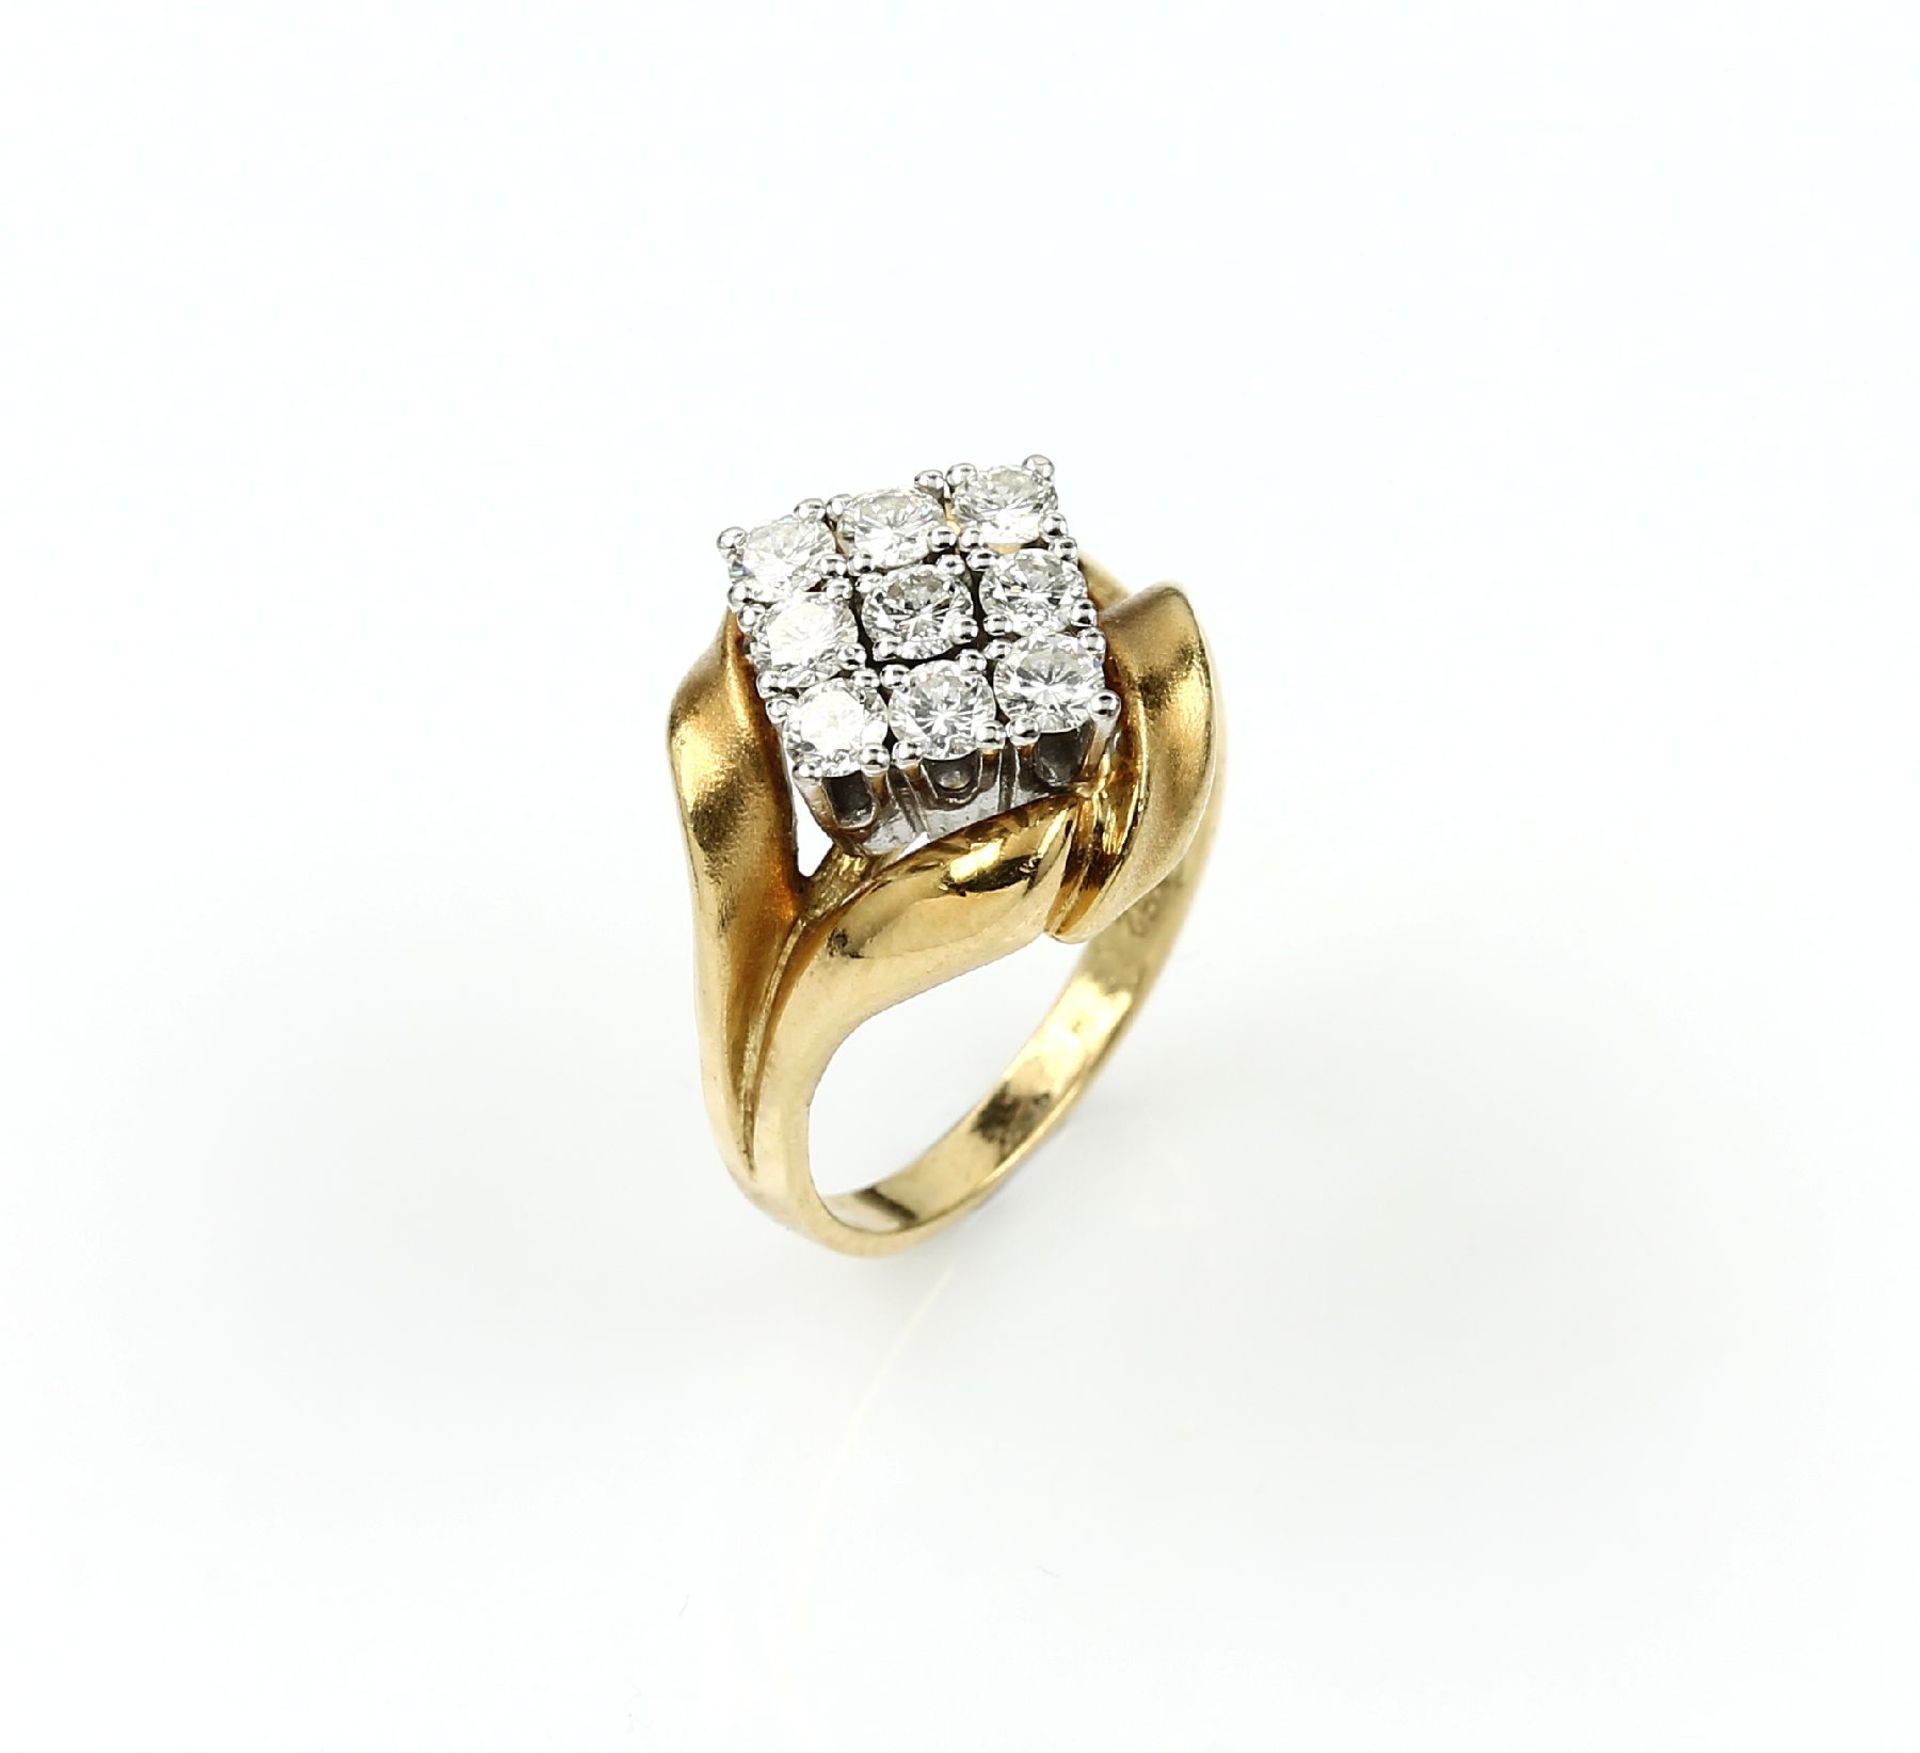 18 kt gold ring with brilliants , YG/WG 750/000, 9 brilliants total approx. 0.72 ct (engraved) Top